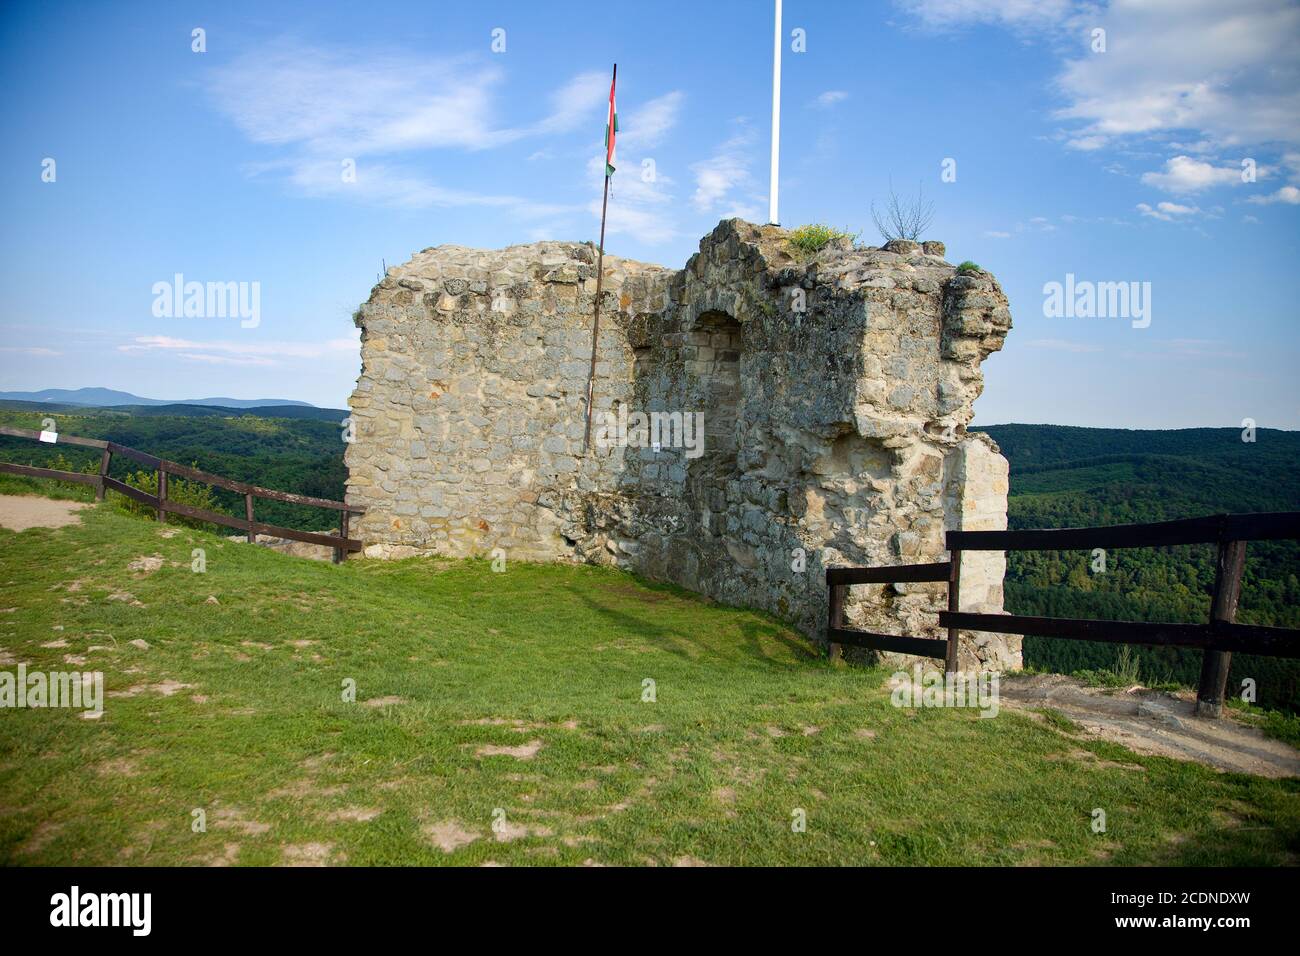 Old walls of castle of Sirok in Hungary Stock Photo